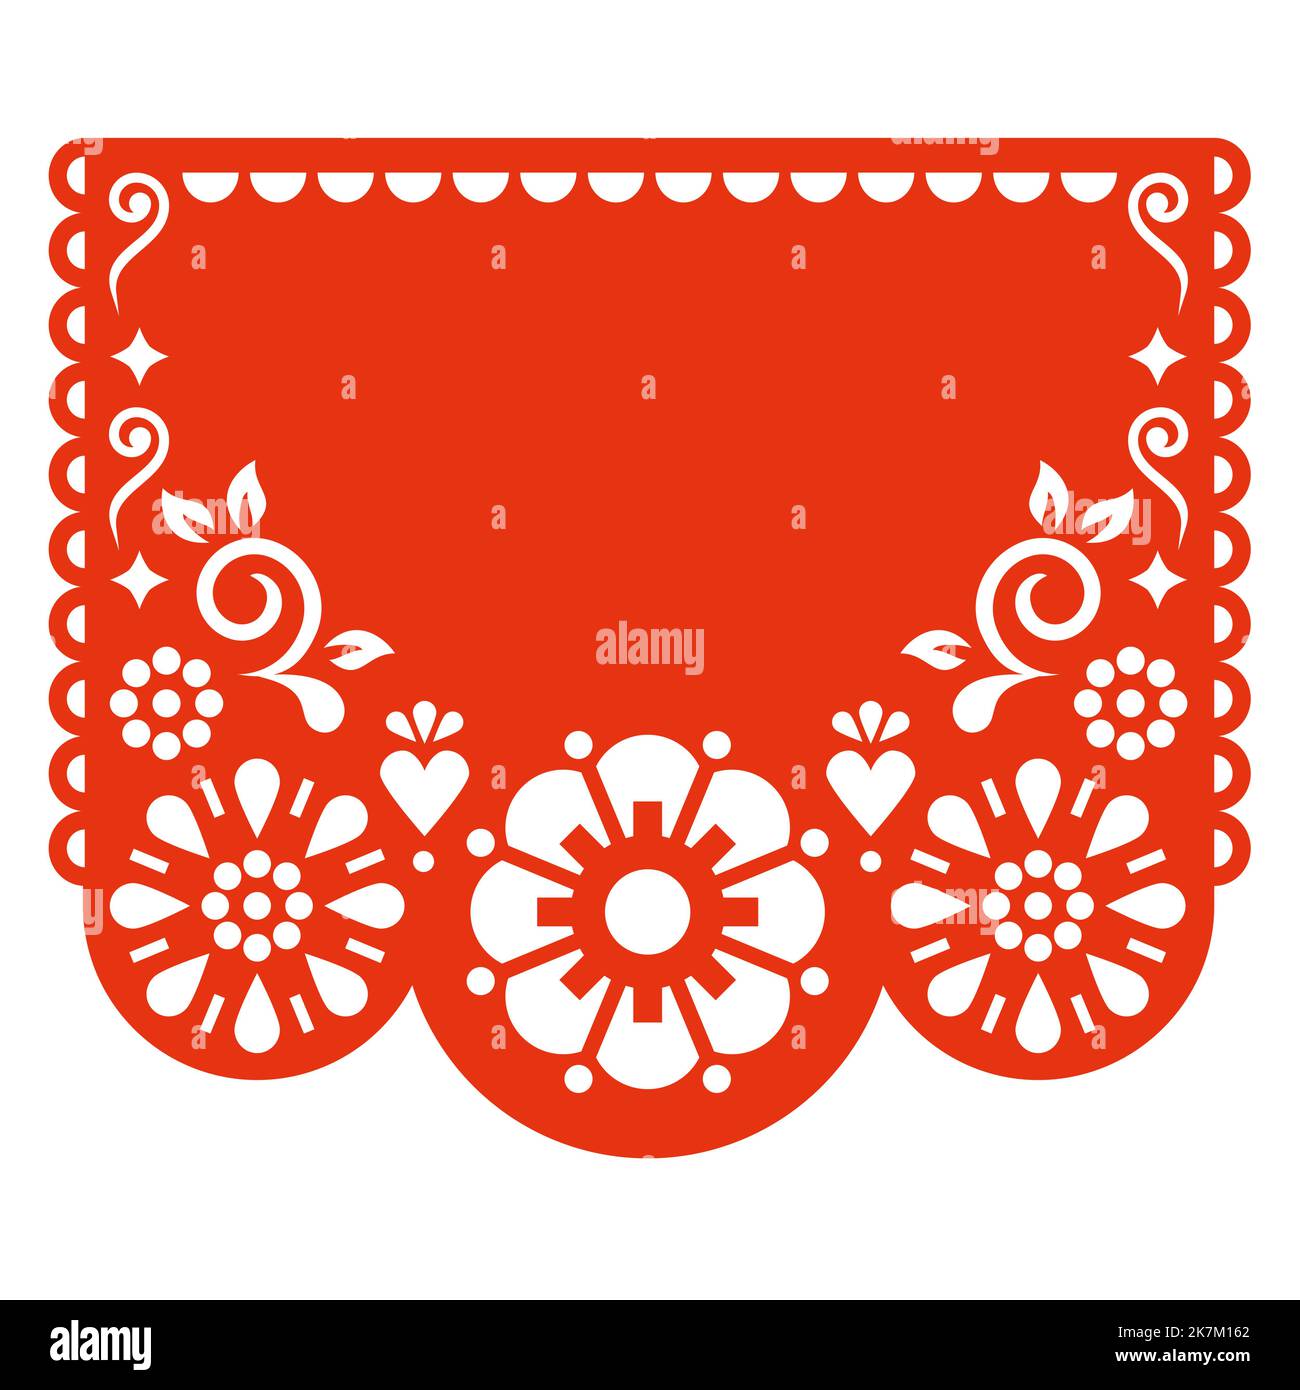 Papel Picado vector template design with flowers and blank space for text, Mexican cutout paper garland decoration in red on white background Stock Vector